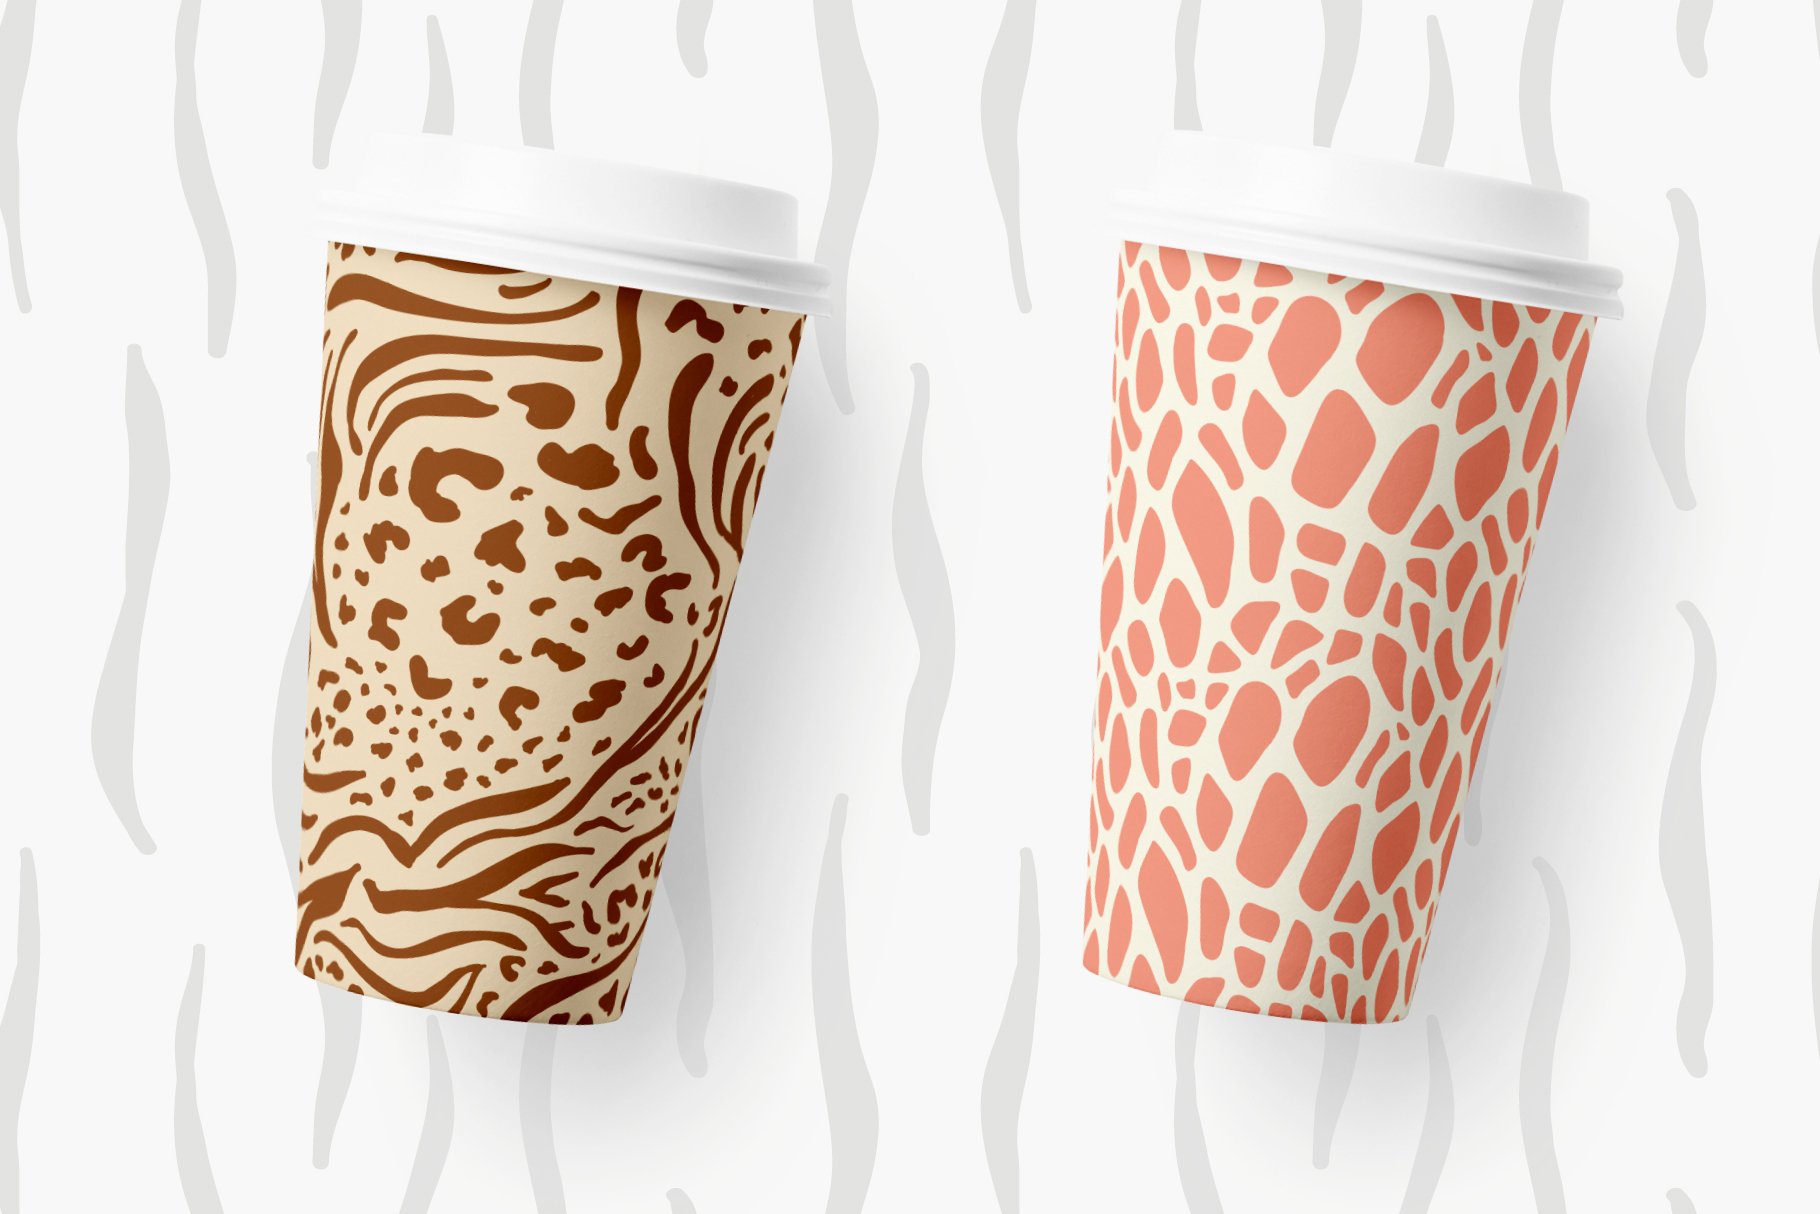 Cow prints for a paper cups.